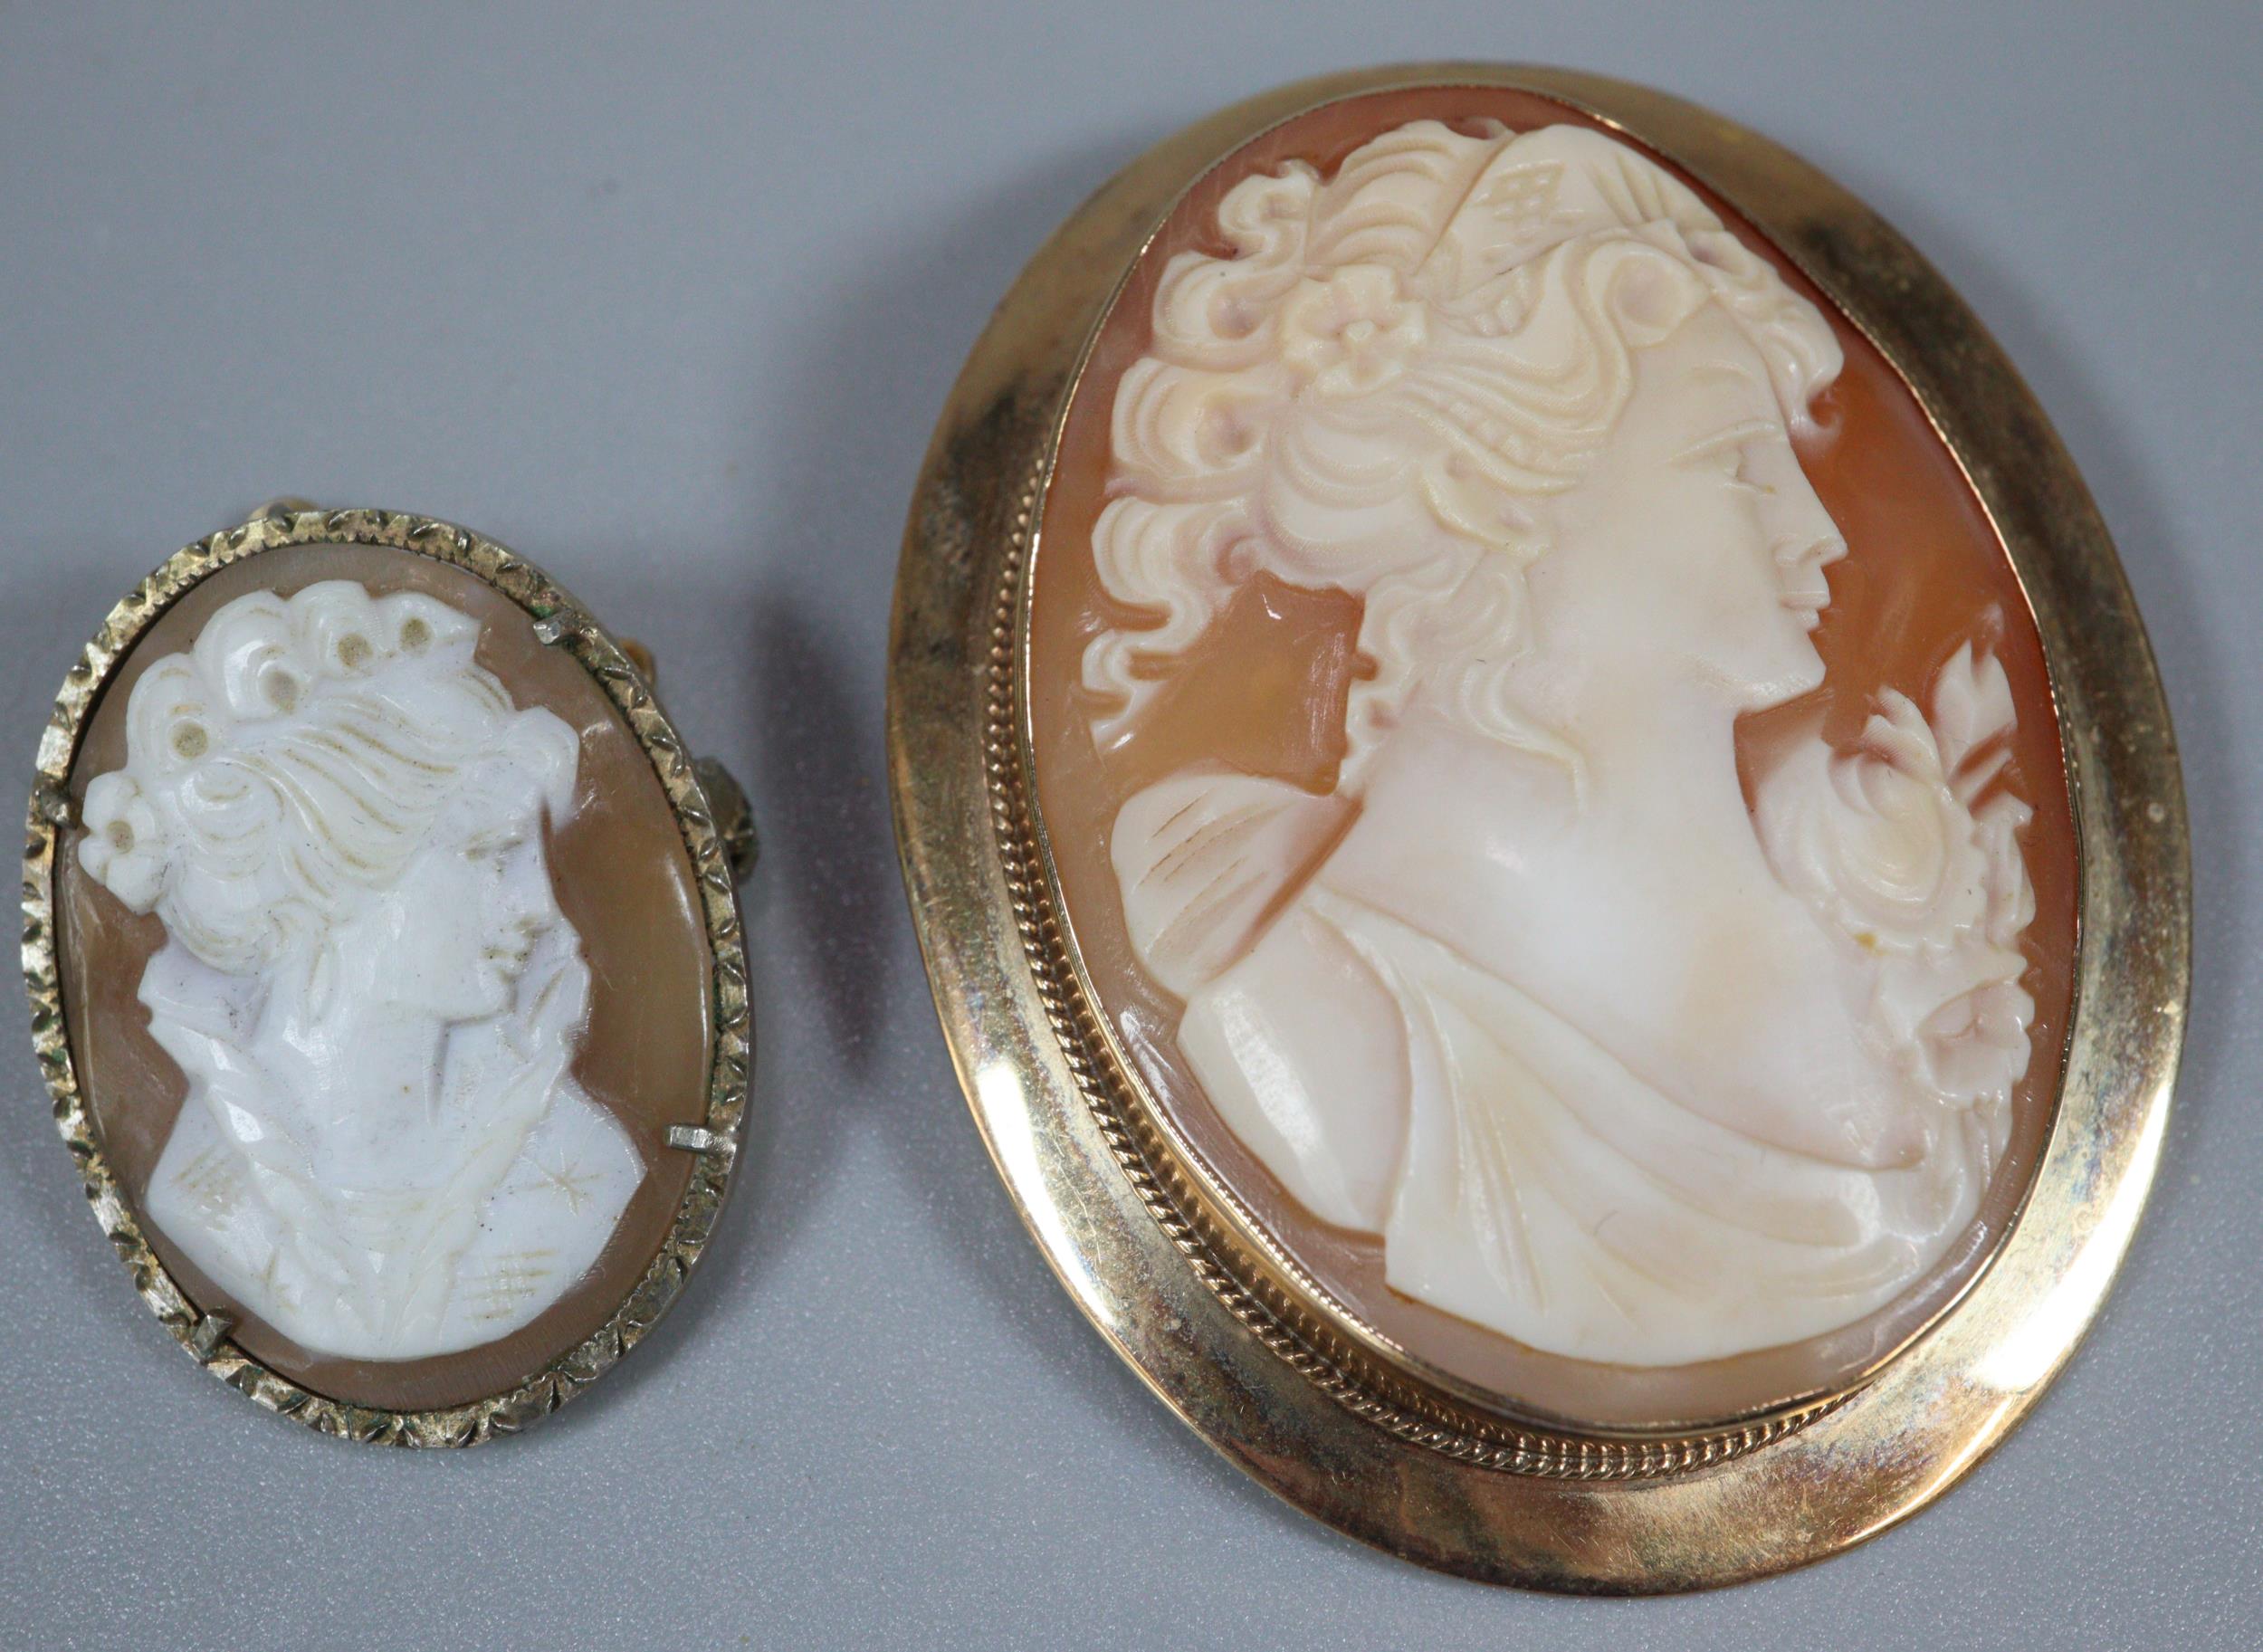 9ct gold cameo portrait brooch together with a silver cameo portrait brooch. (2) (B.P. 21% + VAT) - Image 2 of 2